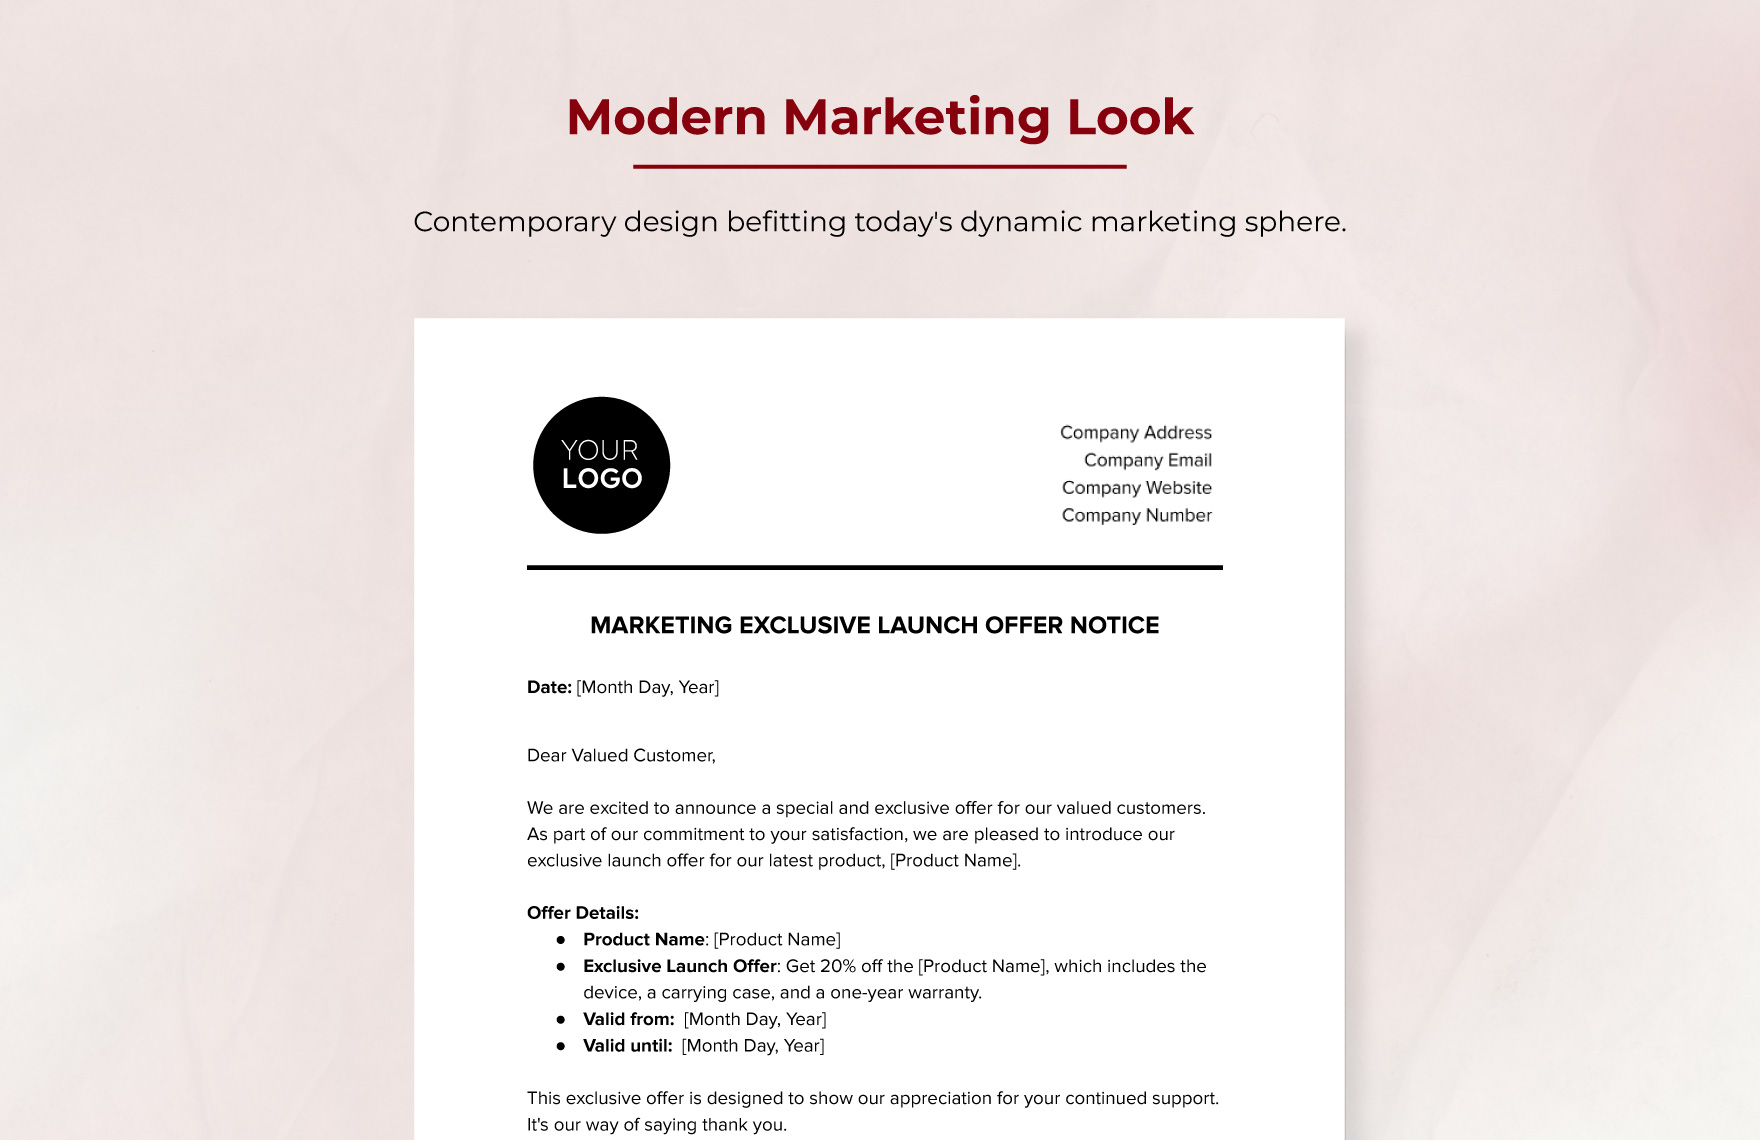 Marketing Exclusive Launch Offer Notice Template